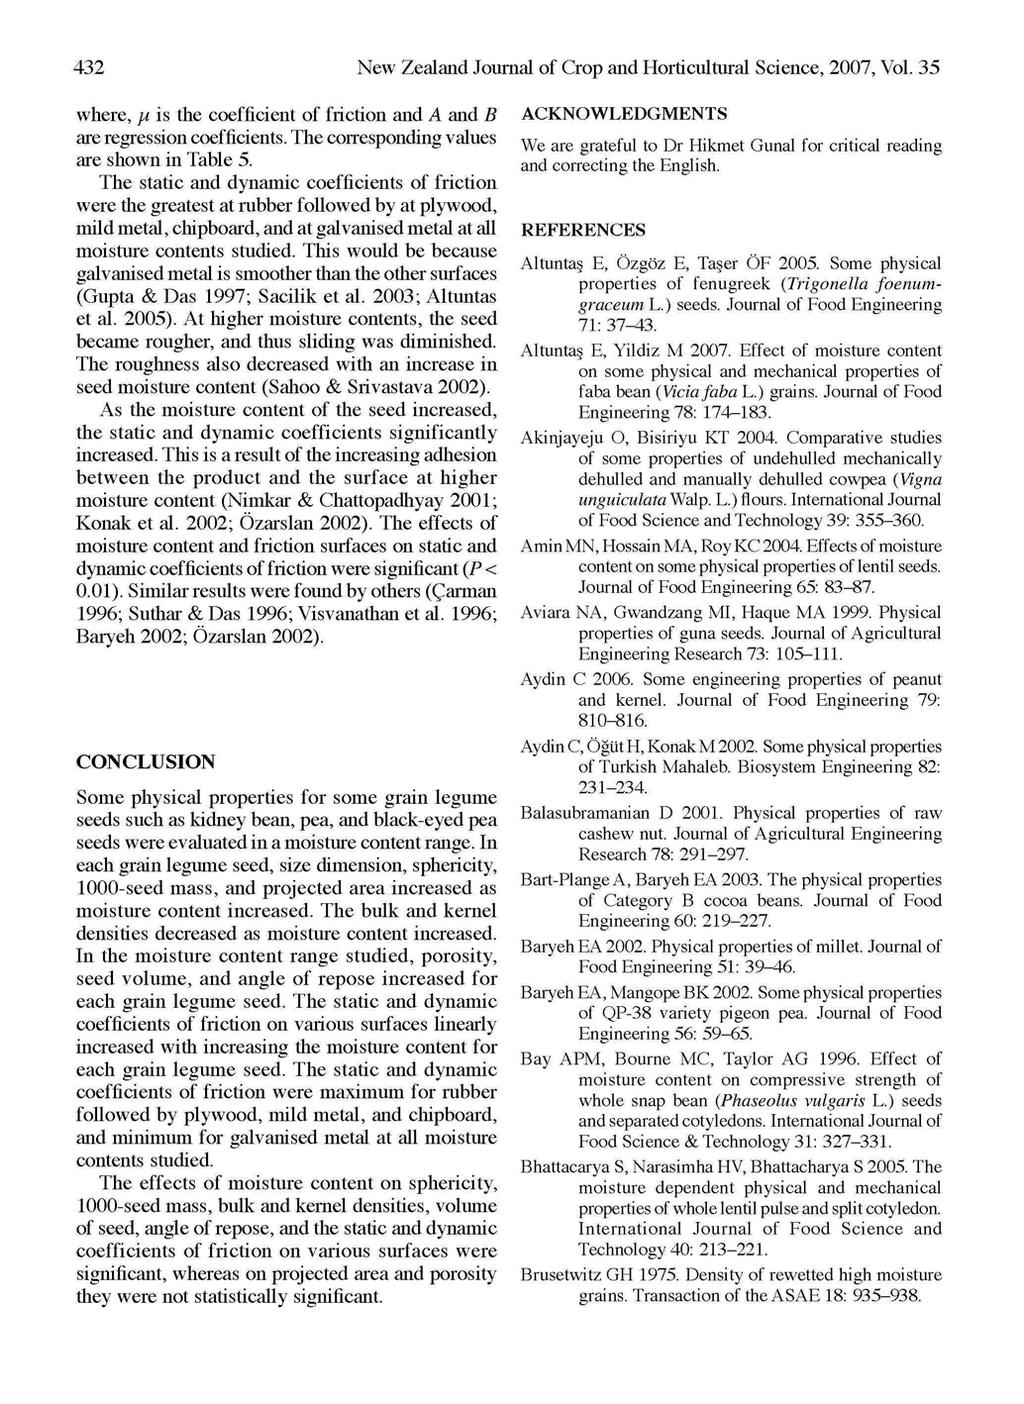 432 New Zealand Journal of Crop and Horticultural Science, 2007, Vol. 35 where, ]Á is the coefficient of friction and A and B are regression coefficients.